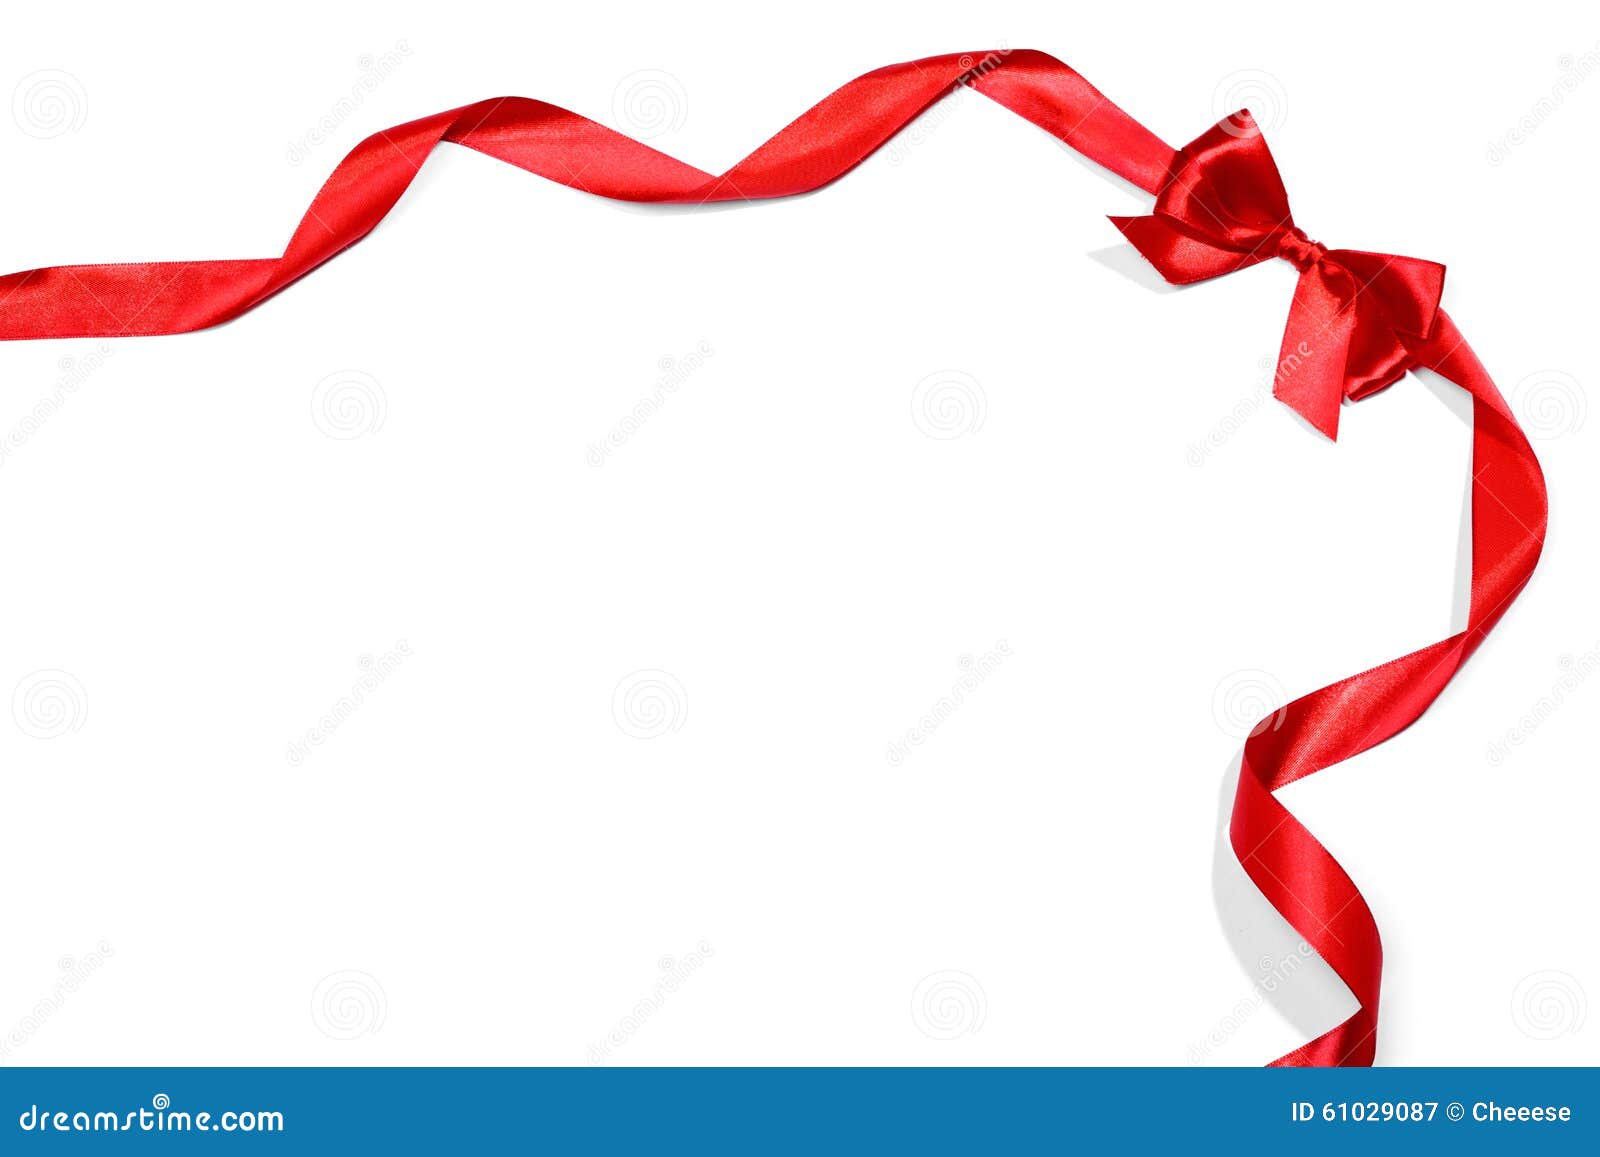 Red ribbons with bow stock image. Image of color, packaging - 61029087